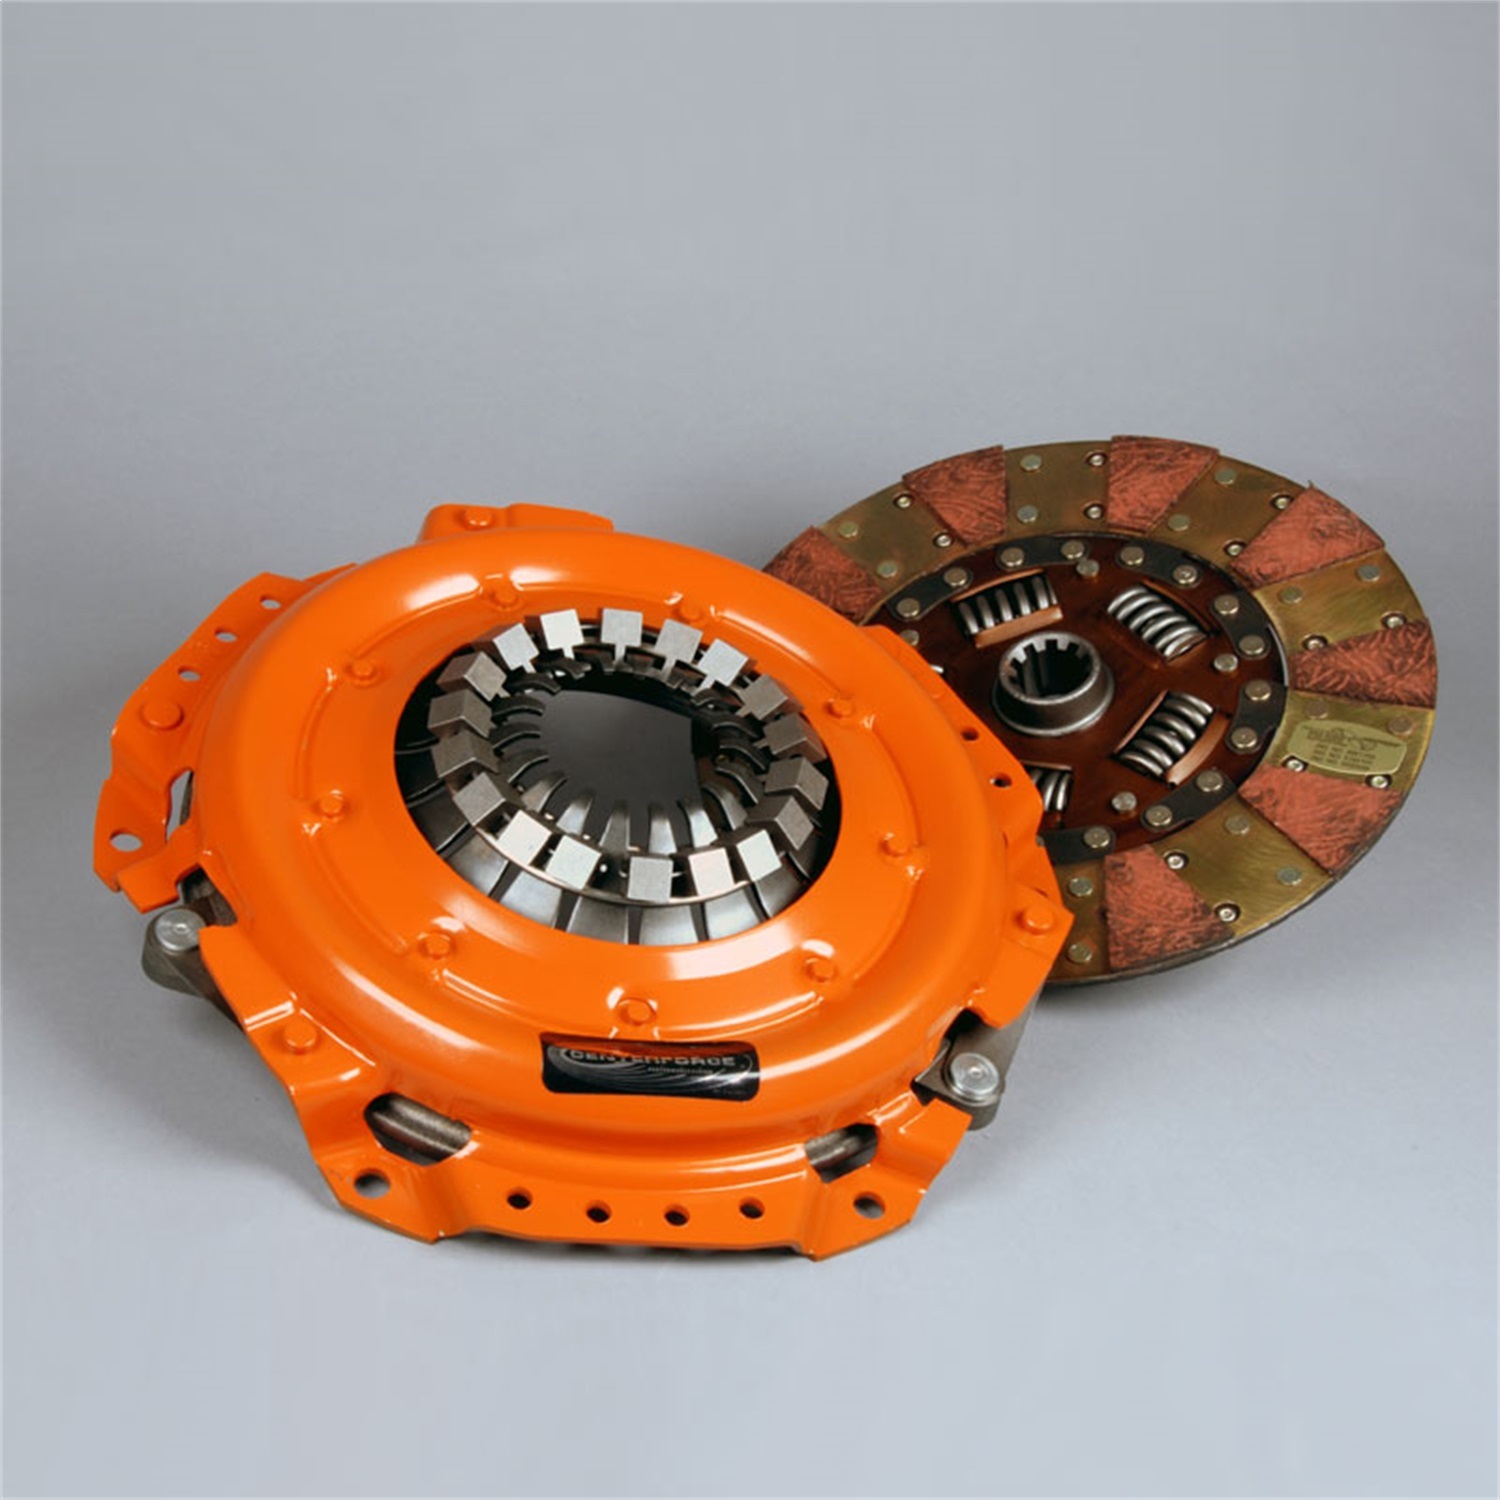 Centerforce Centerforce DF193890 Dual Friction Clutch Pressure Plate And Disc Set